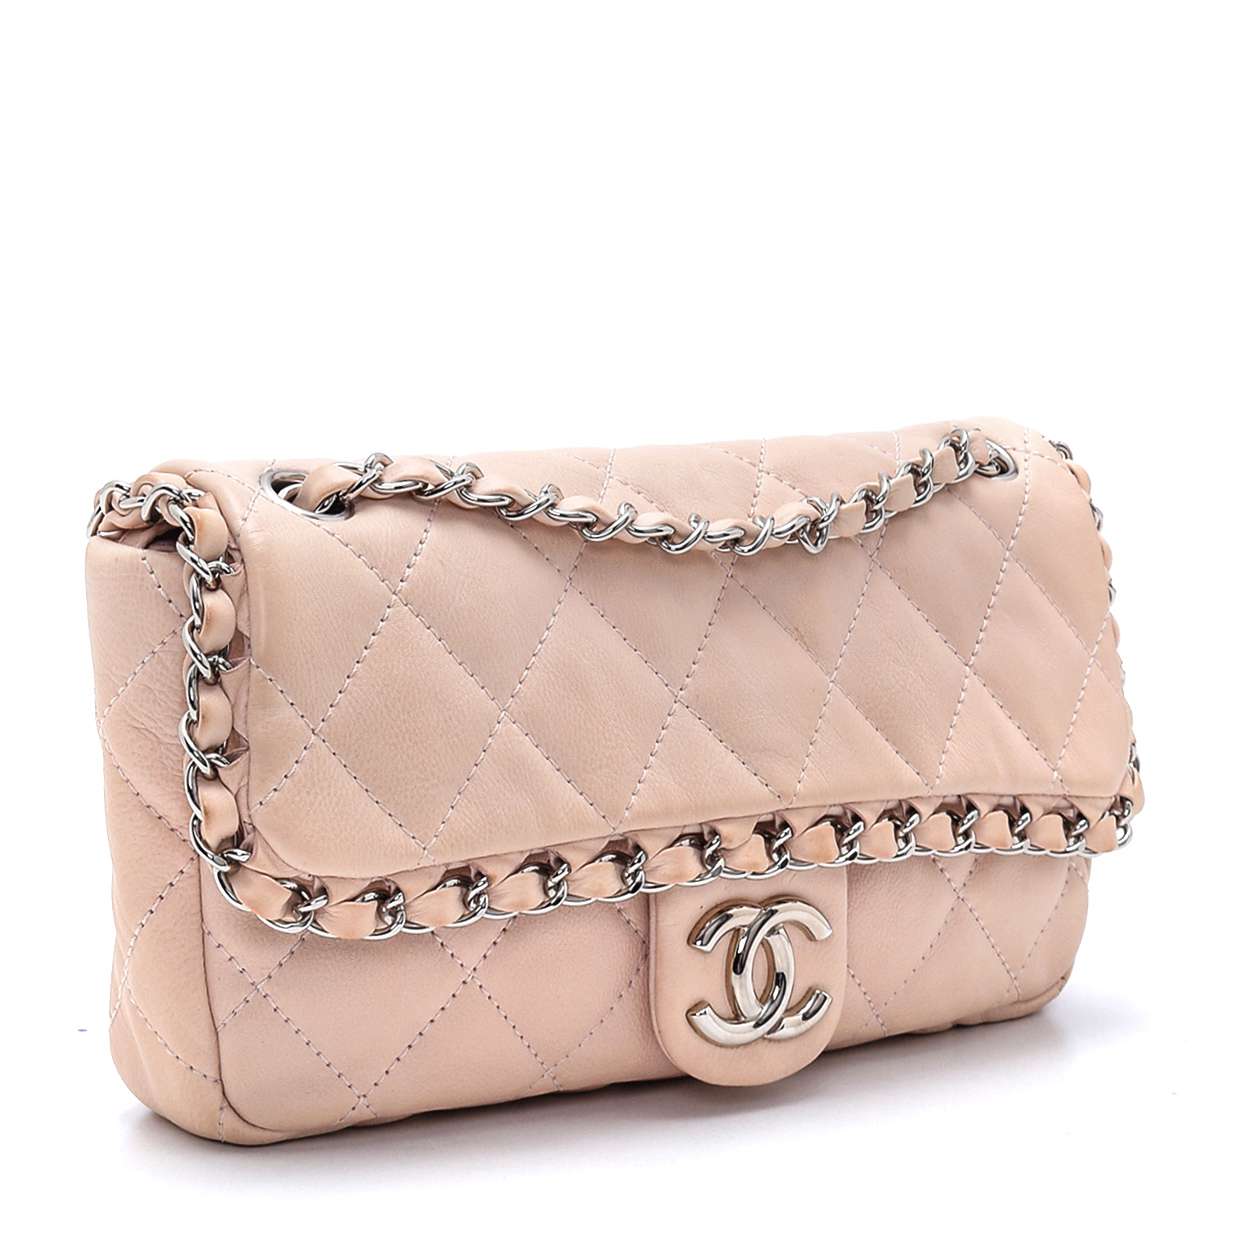 Chanel - Nude Lambskin Leather Quilted Chain Flap Bag